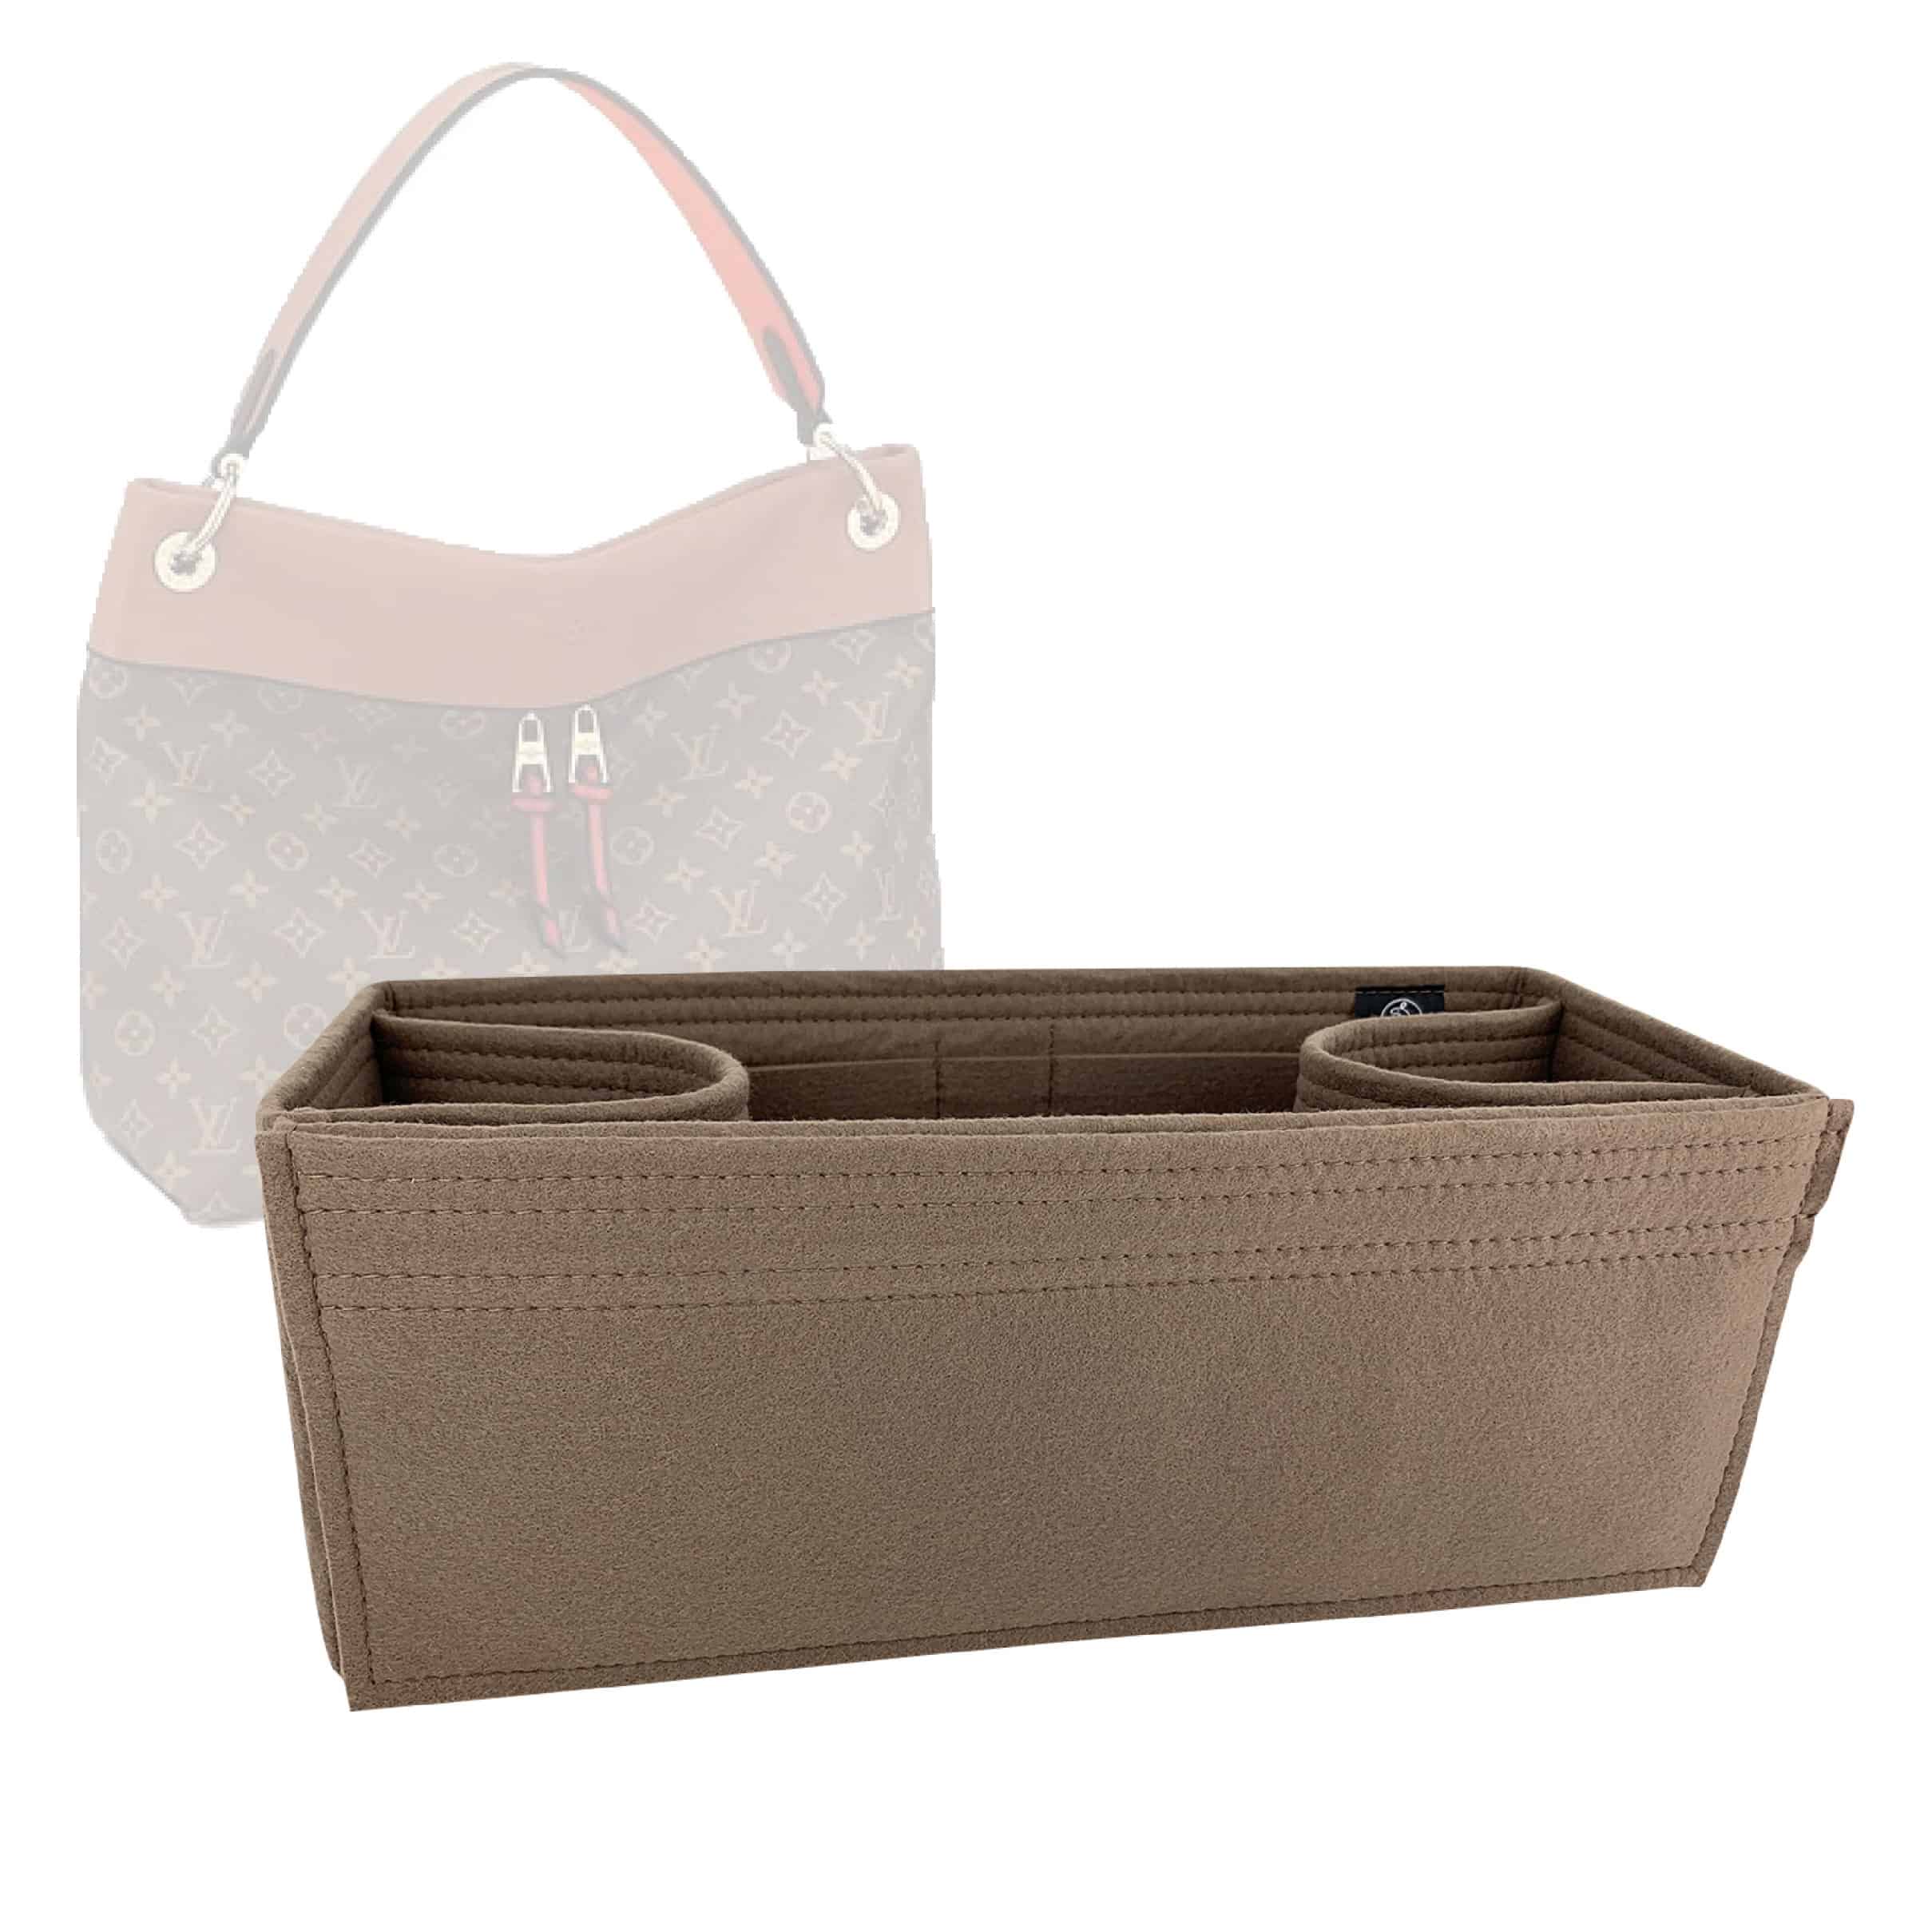 Tote Bag Organizer for Louis Vuitton Tuileries Hobo Bag with Double Bottle Holders